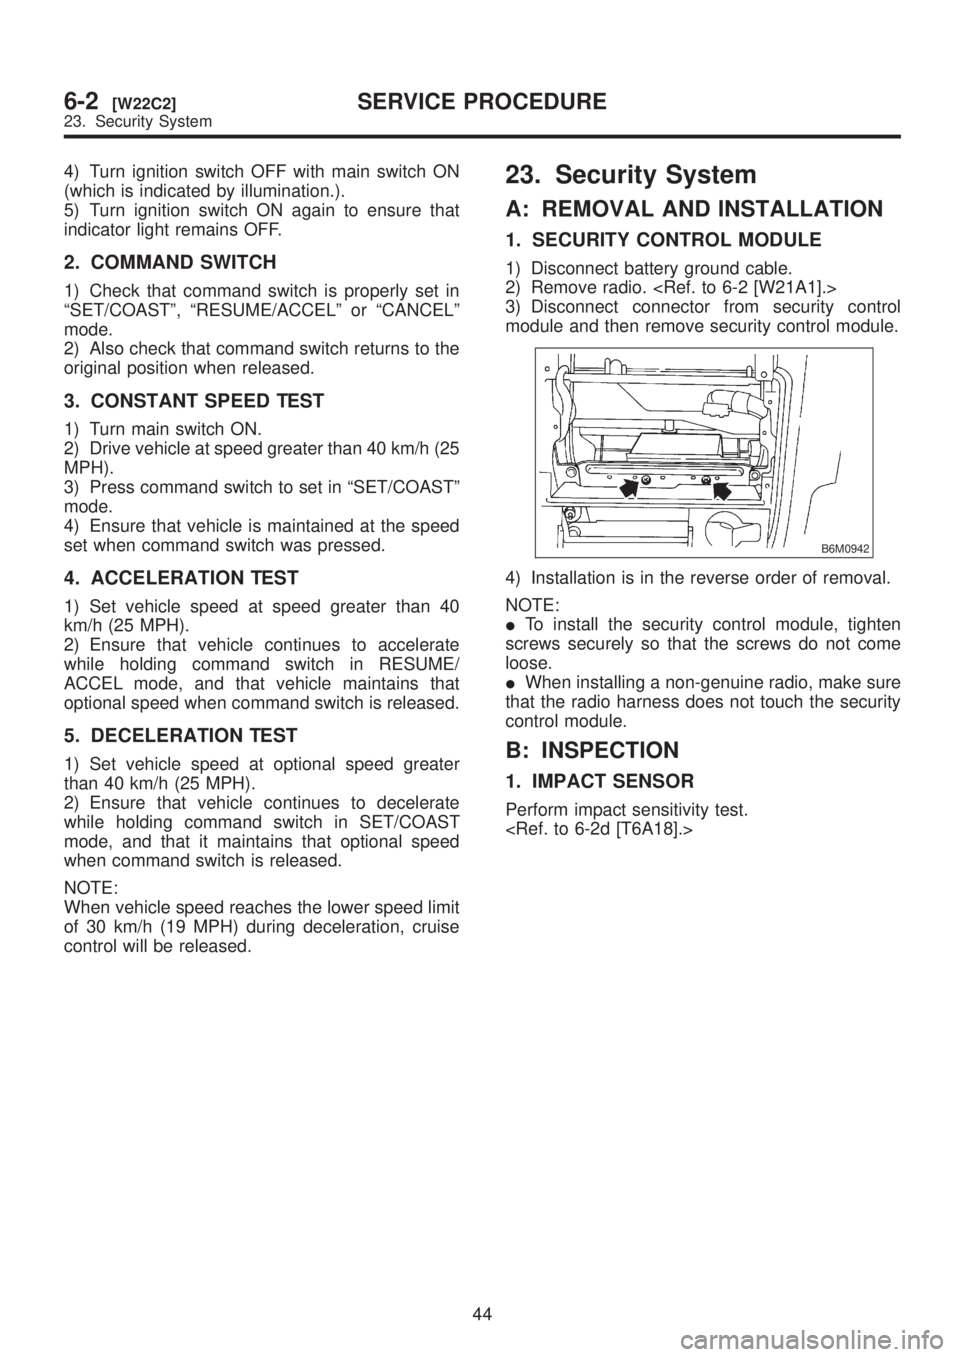 SUBARU LEGACY 1999  Service Repair Manual 4) Turn ignition switch OFF with main switch ON
(which is indicated by illumination.).
5) Turn ignition switch ON again to ensure that
indicator light remains OFF.
2. COMMAND SWITCH
1) Check that comm